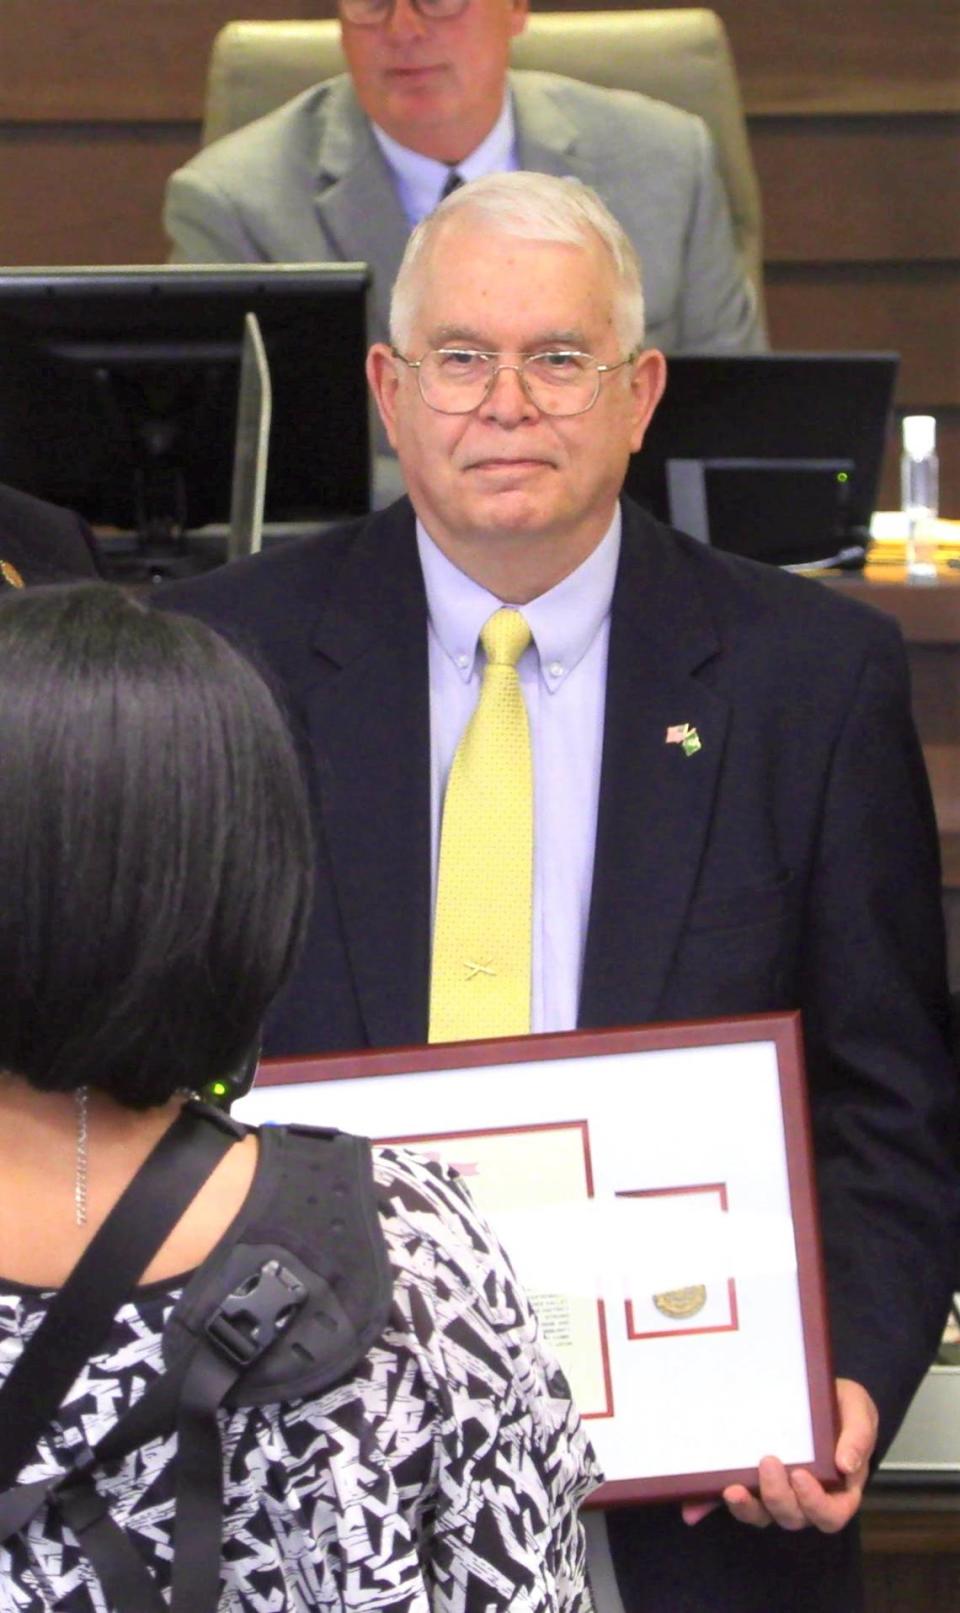 Fort Benning presented resigning Columbus Councilor John House with a meritorious civilian service award at his last council meeting.